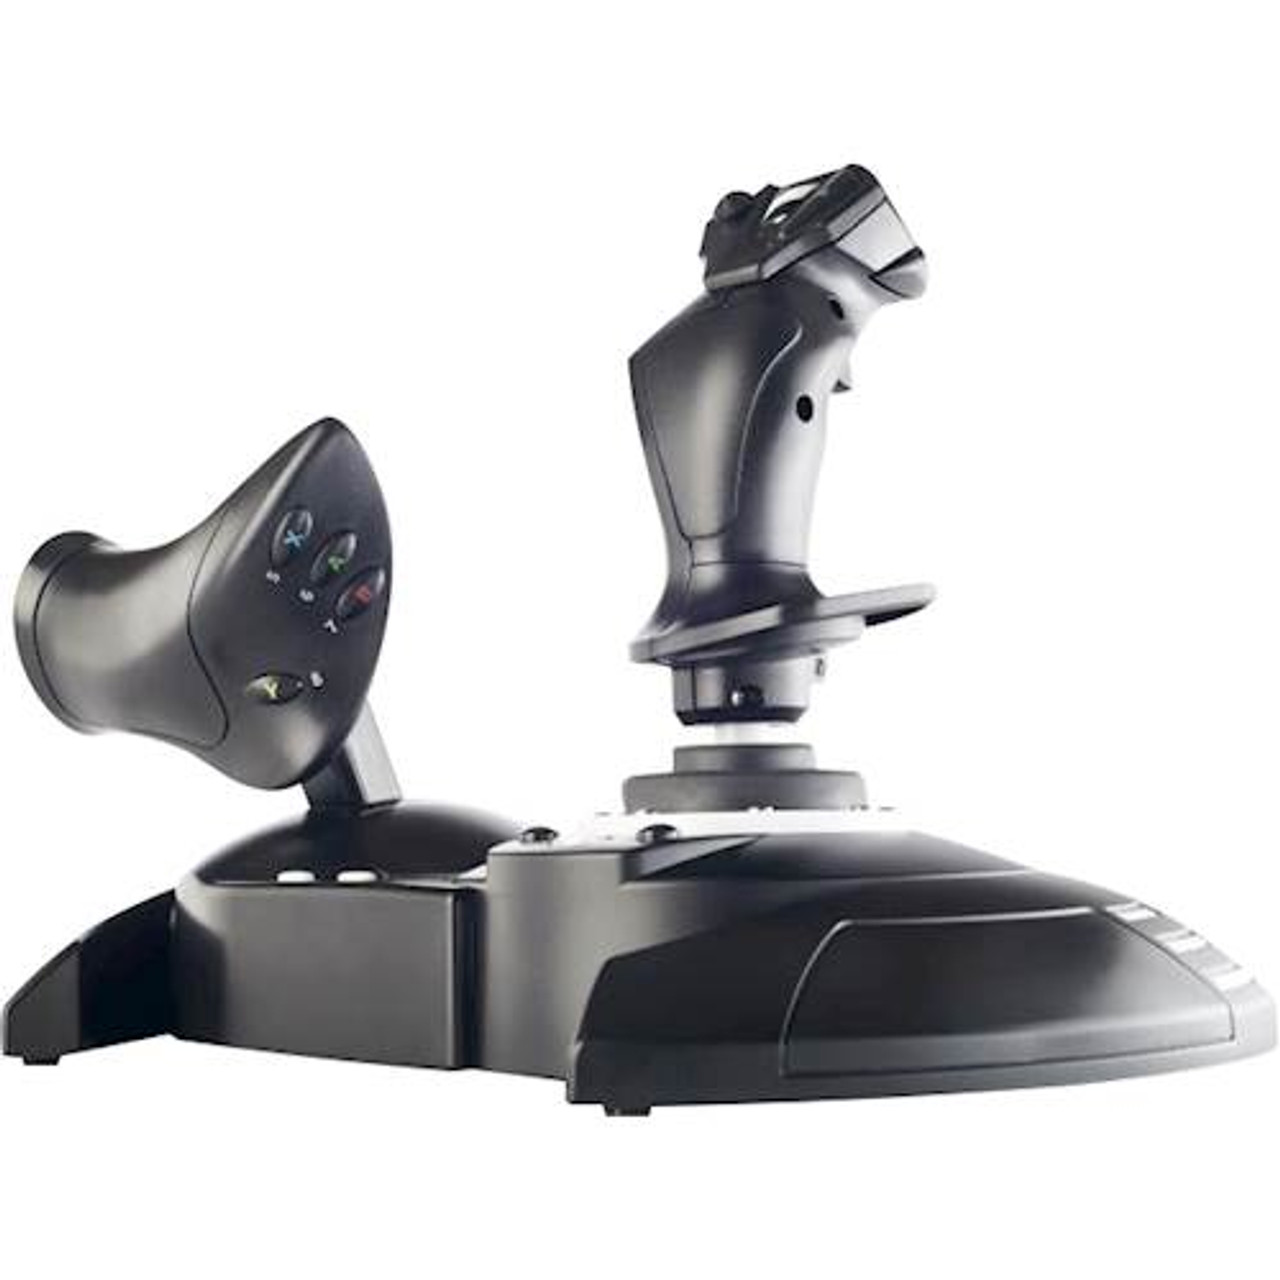 Thrustmaster - T.Flight Hotas One Flight Stick for Xbox One & PC